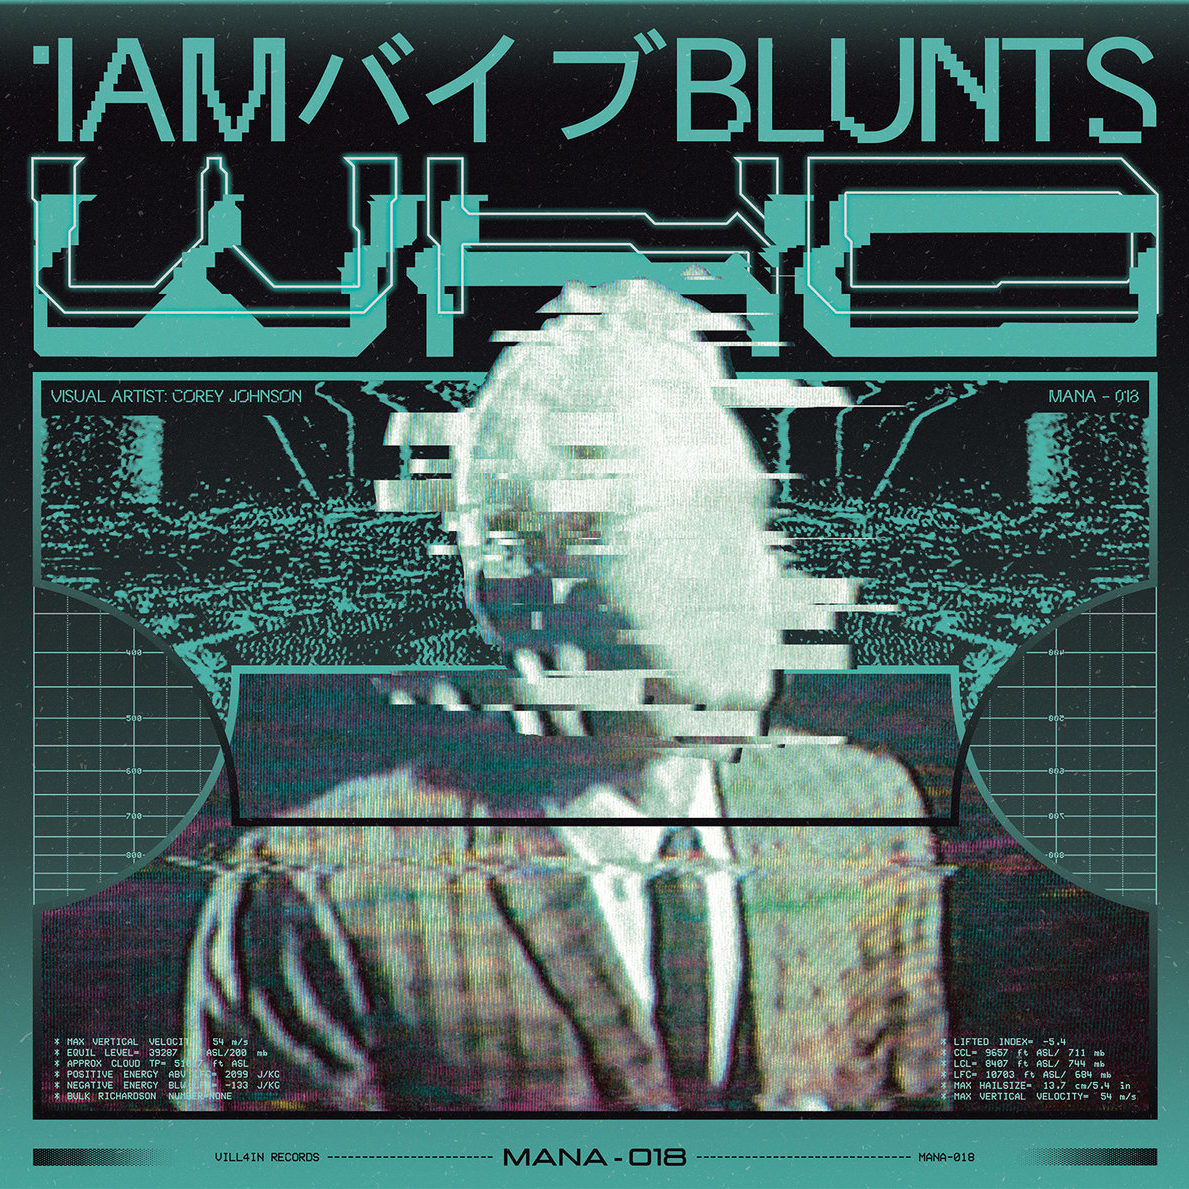 Who by 1am バイブBlunts